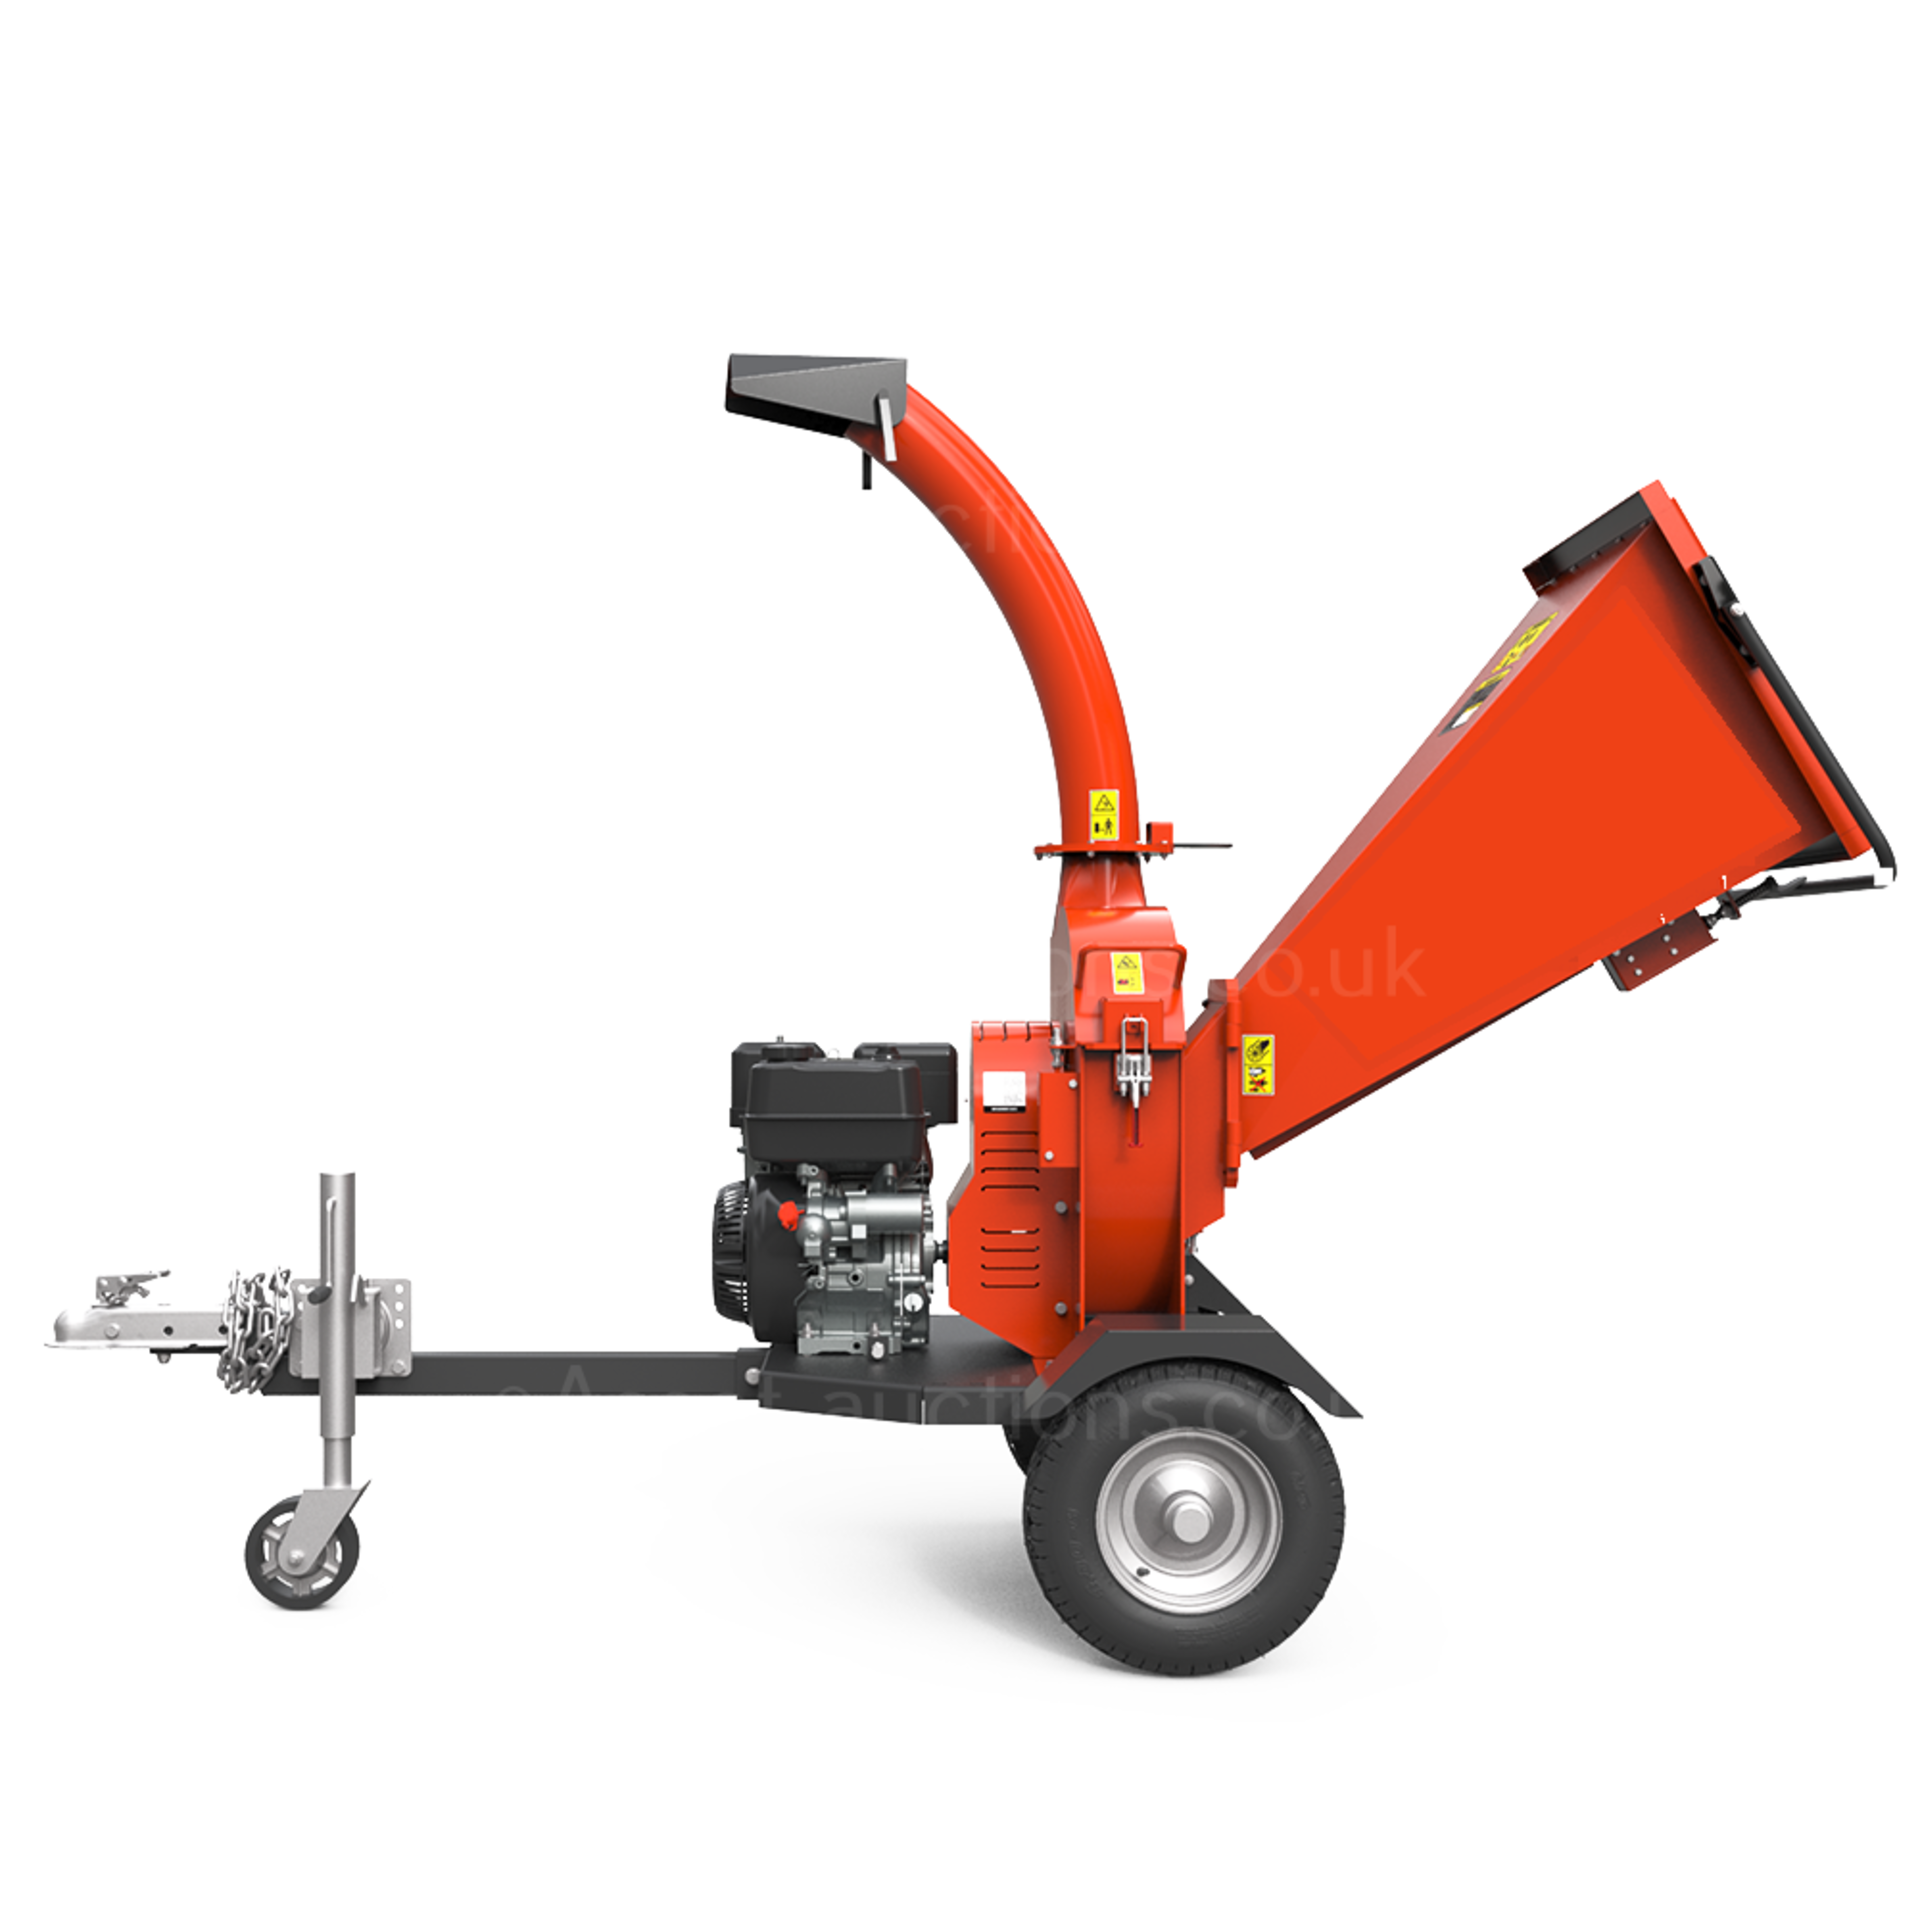 BRAND NEW AND UNUSED DGS1500 420CC 4.5” TOWABLE PETROL WOOD CHIPPER *NO VAT* - Image 10 of 11